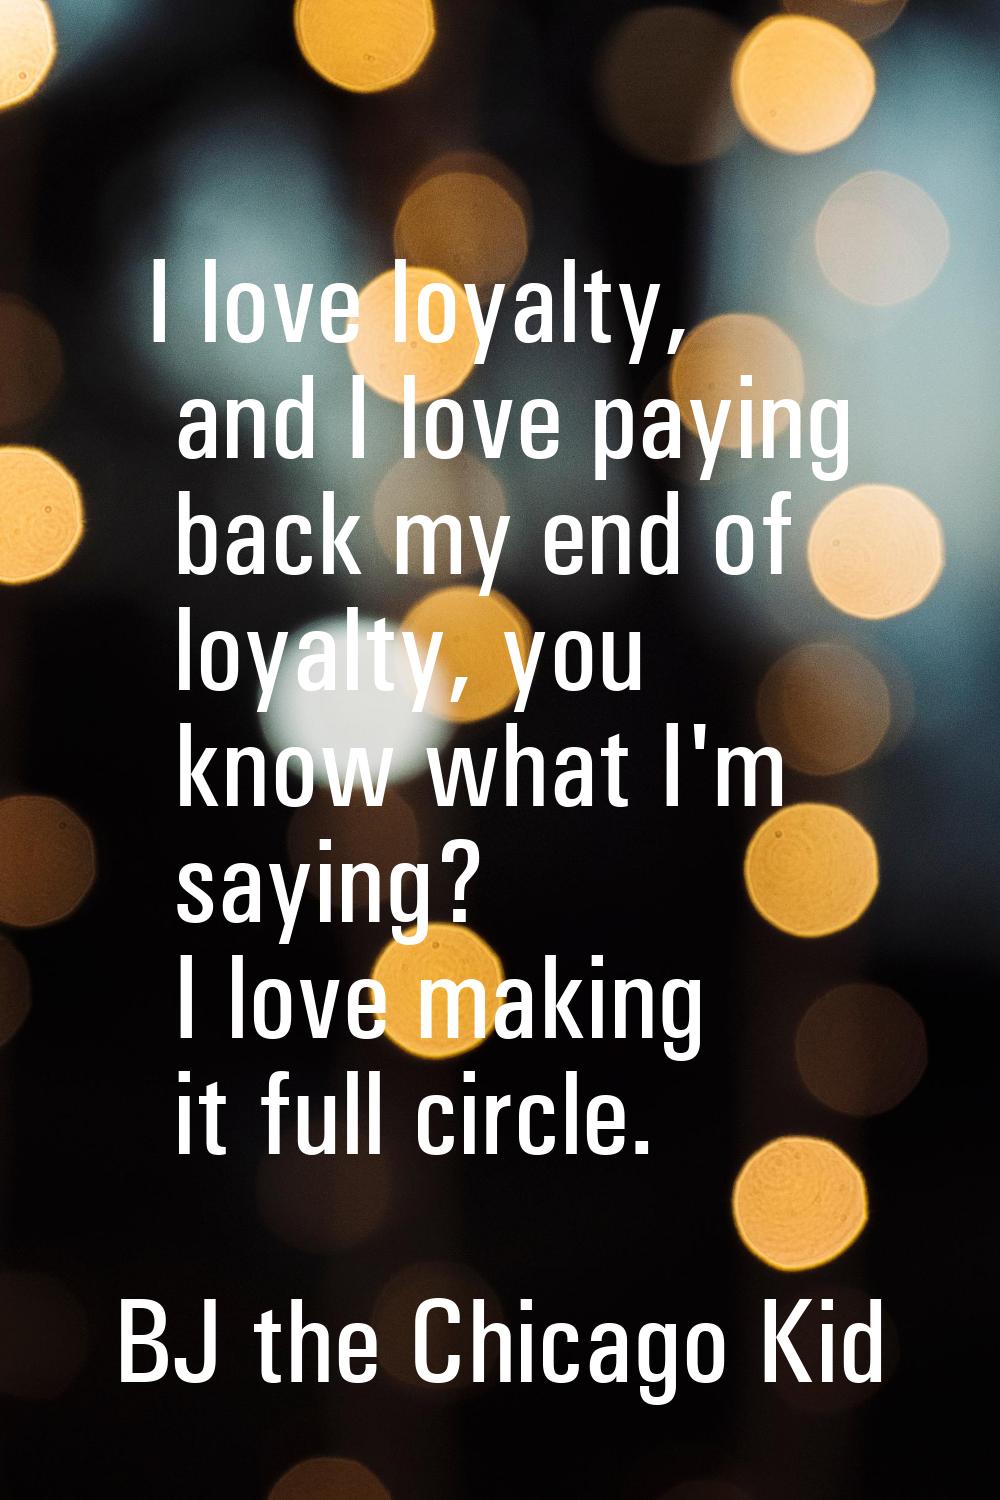 I love loyalty, and I love paying back my end of loyalty, you know what I'm saying? I love making i